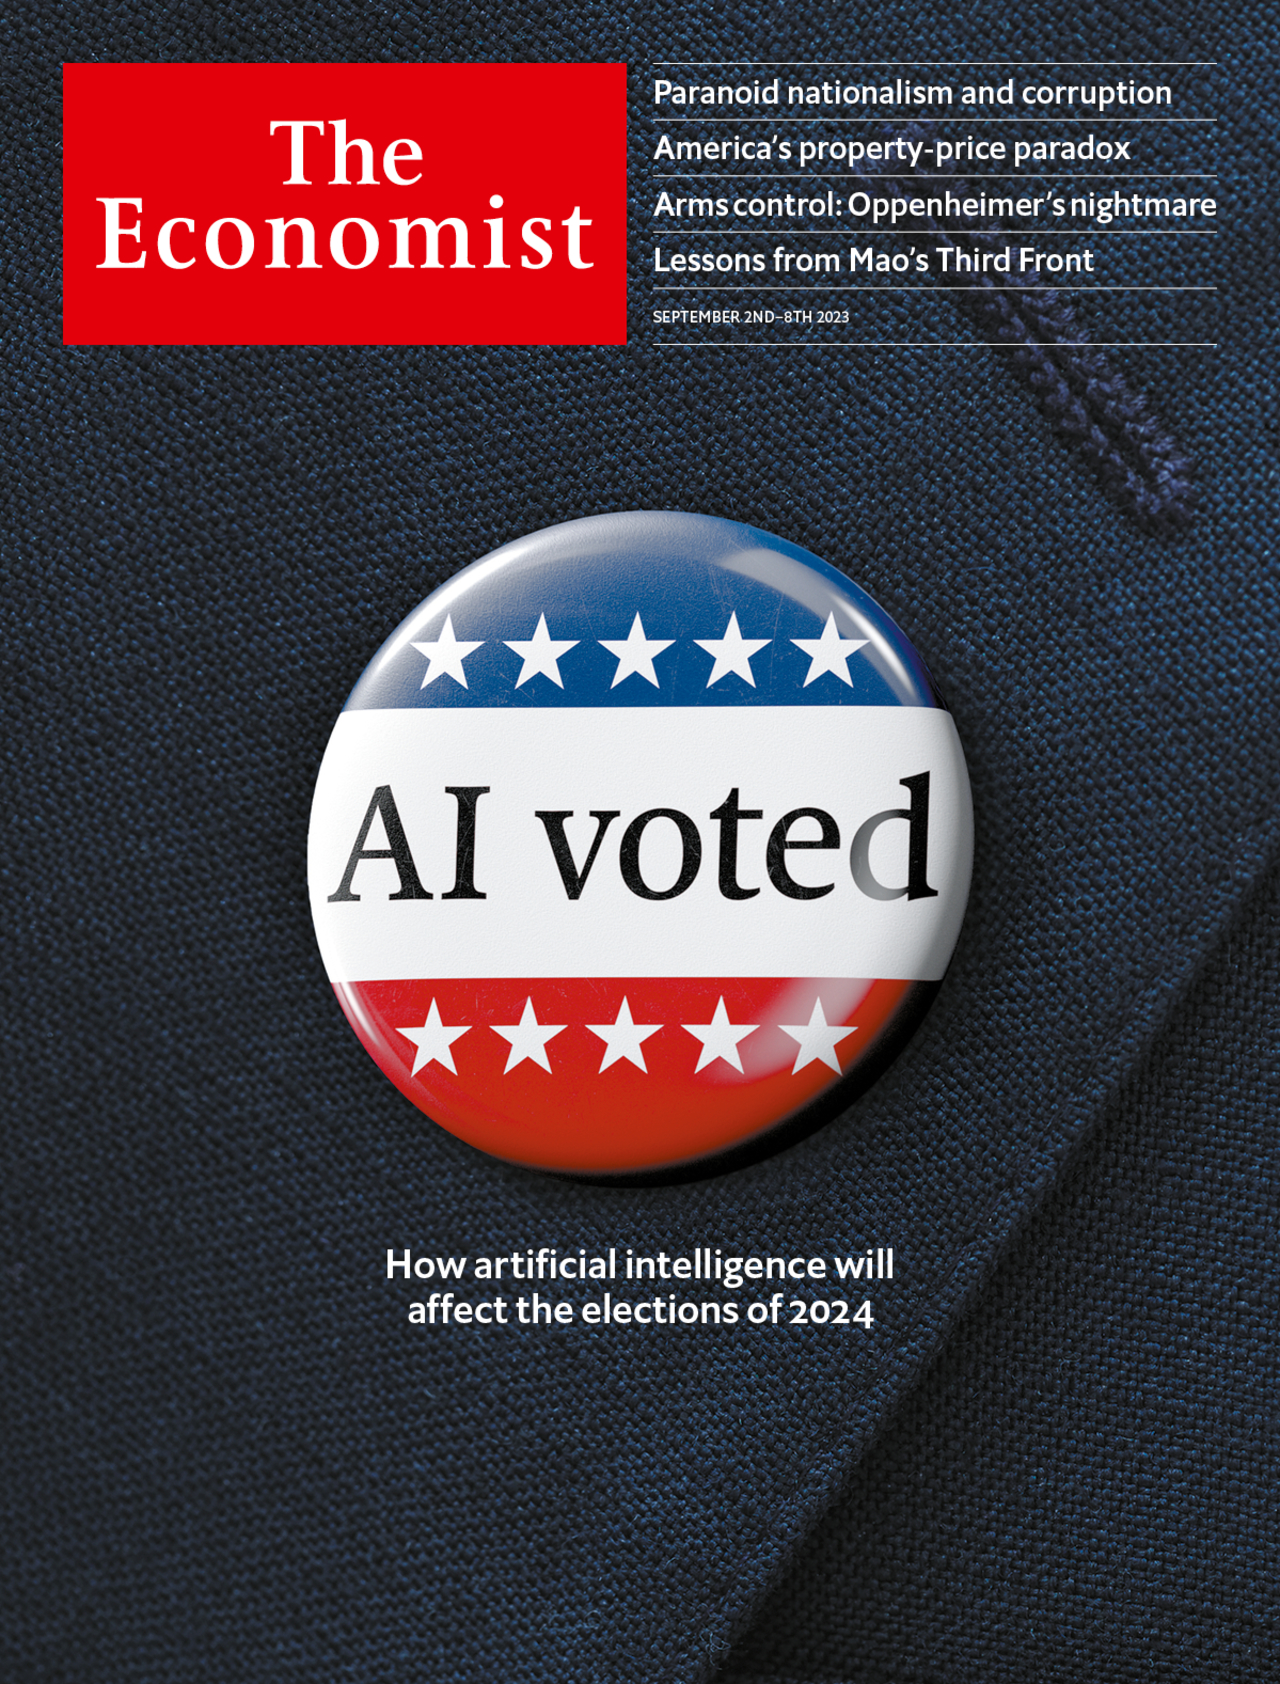 AI voted: How artificial intelligence will affect the elections of 2024